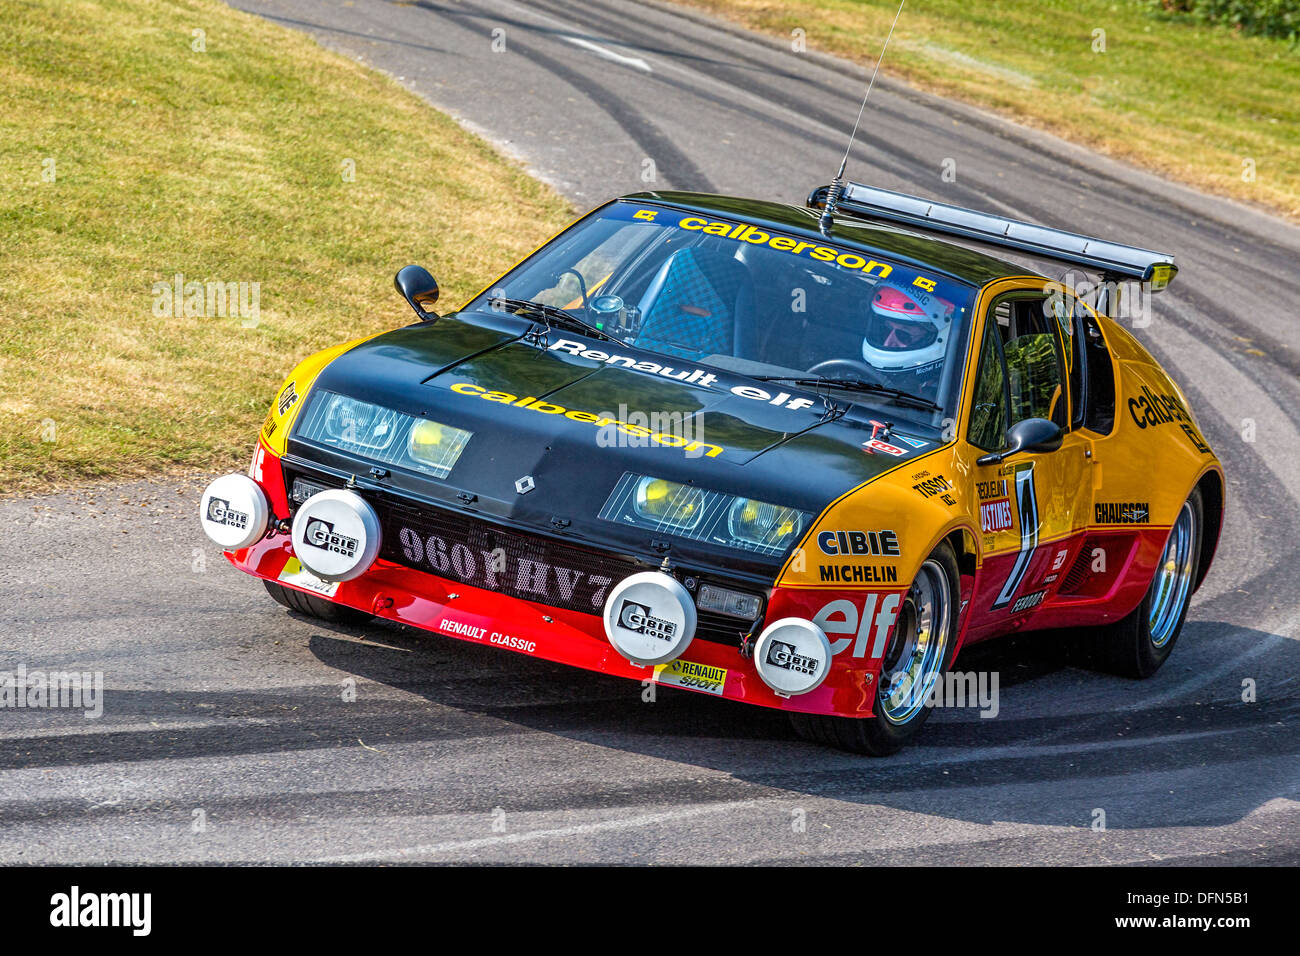 1977 Renault Alpine A310 at the 2013 Goodwood Festival of Speed, Sussex, UK. Stock Photo